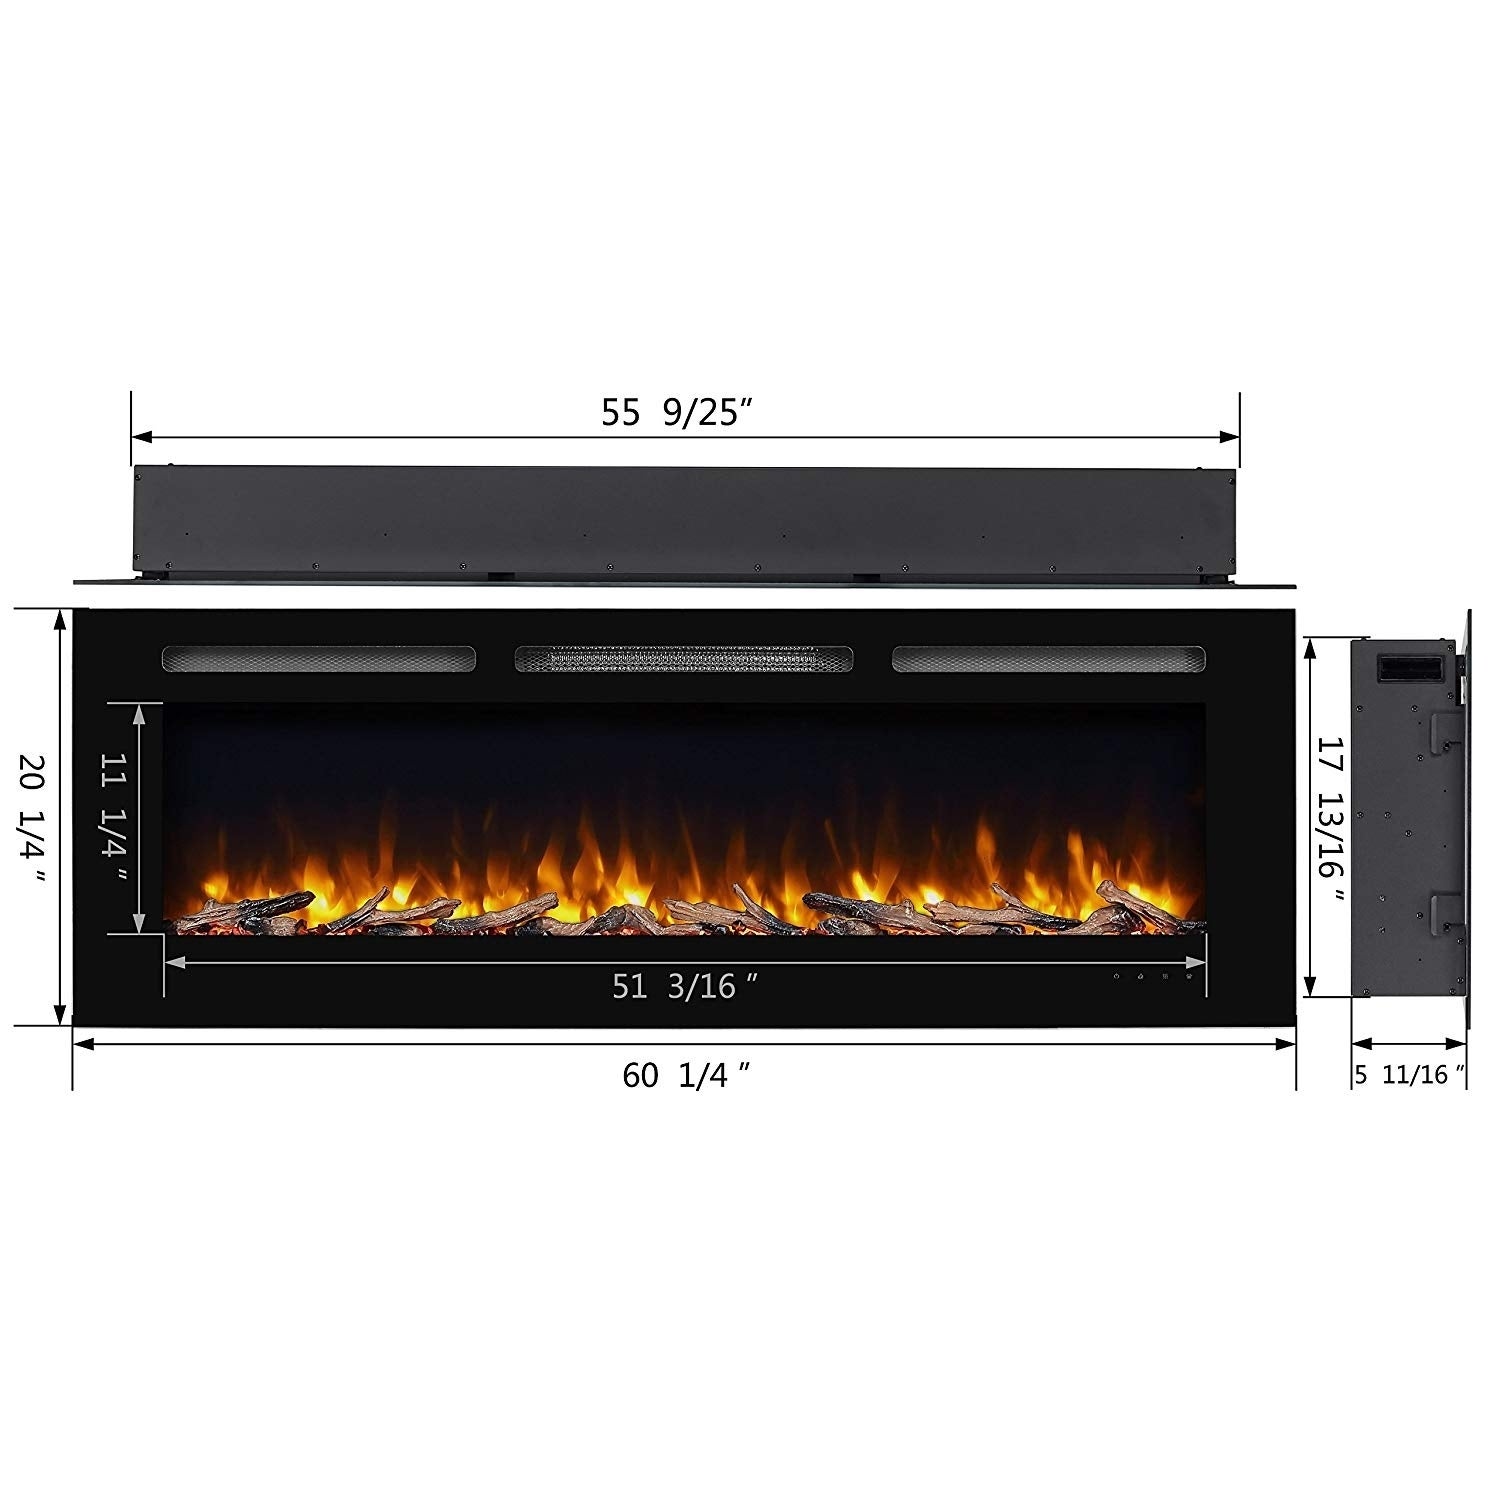 Overstock Fireplace Tv Stand Inspirational 60" Alice In Wall Recessed Electric Fireplace 1500w Black